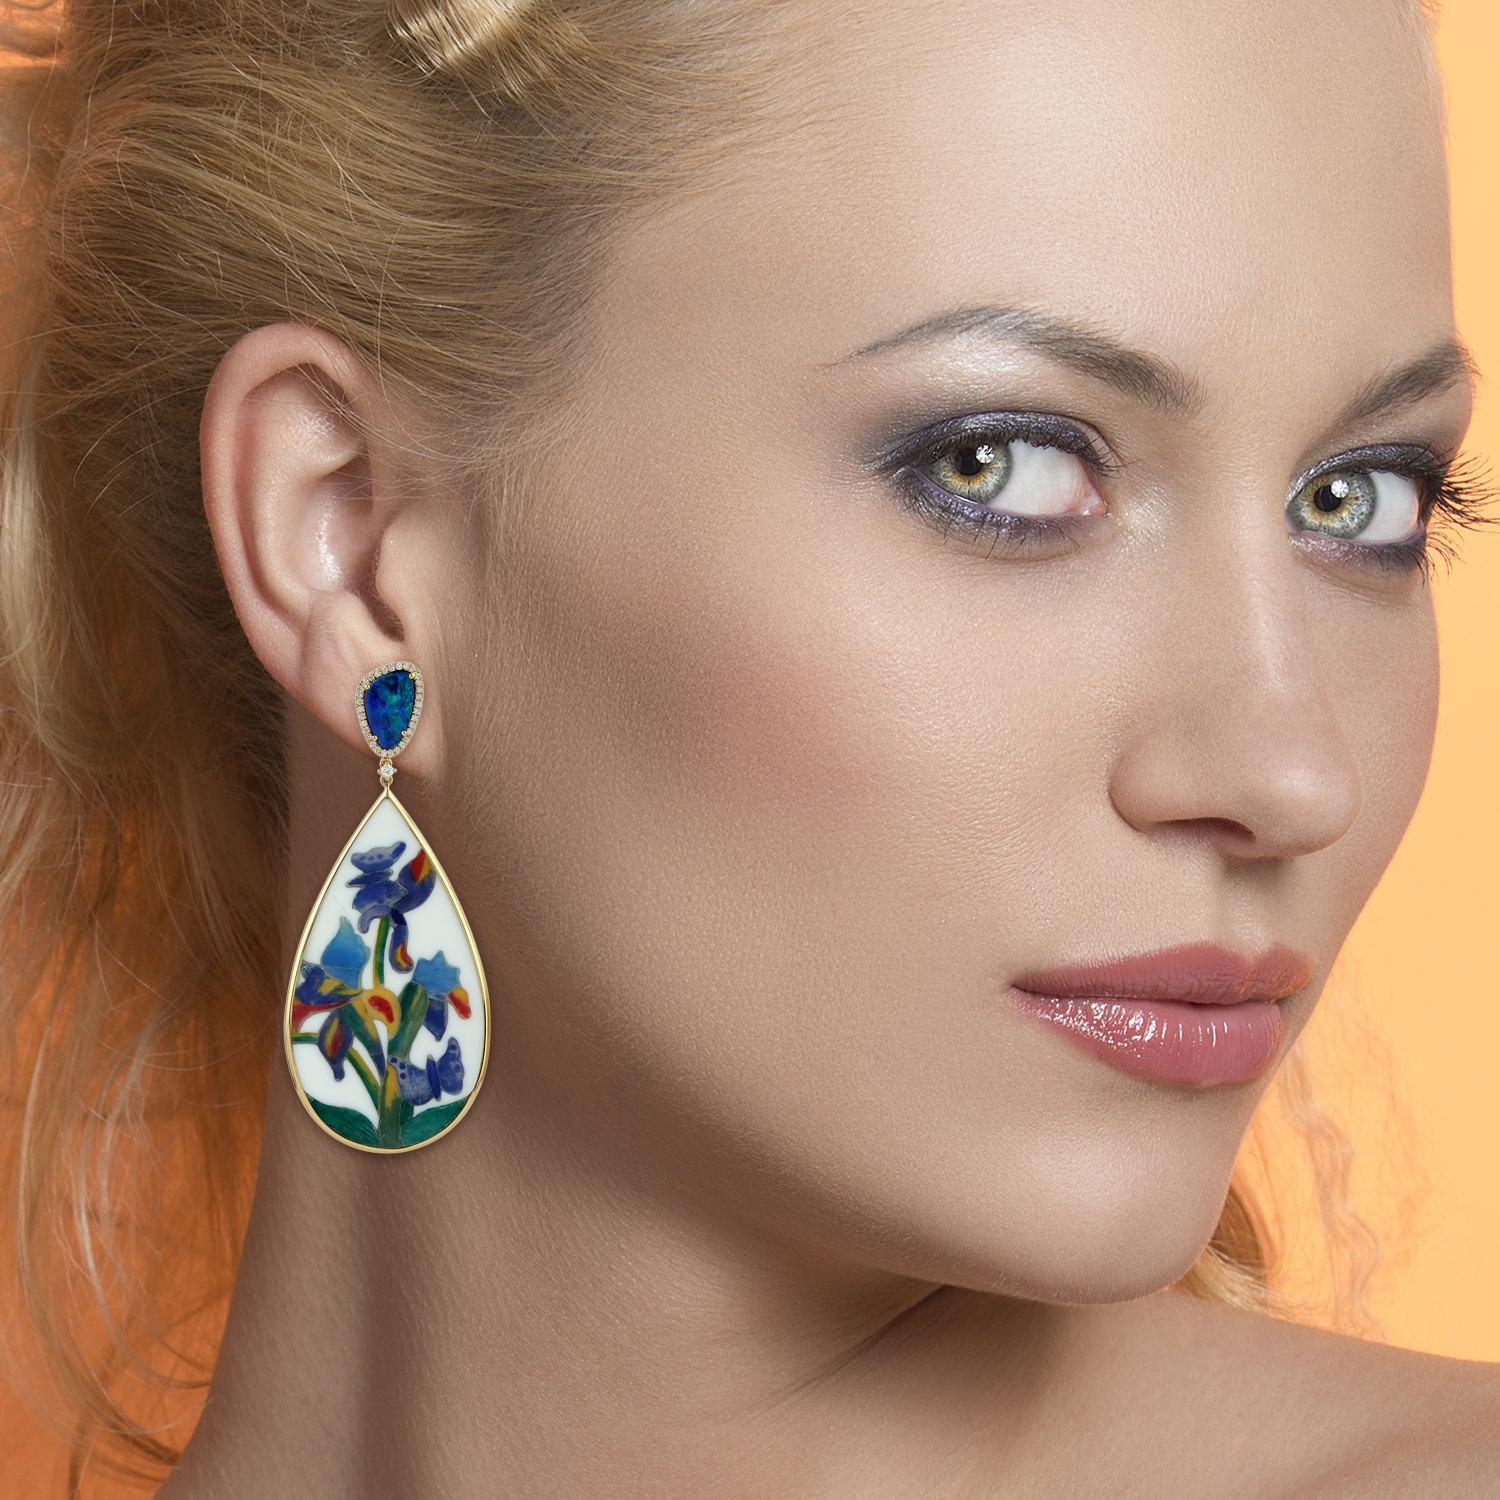 These beautiful flower earrings handmade in 18K Gold. It features unique hand painted miniature art set in 46.45 carats bakelite, 3.73 carats opal and .41 carats diamonds.

FOLLOW  MEGHNA JEWELS storefront to view the latest collection & exclusive